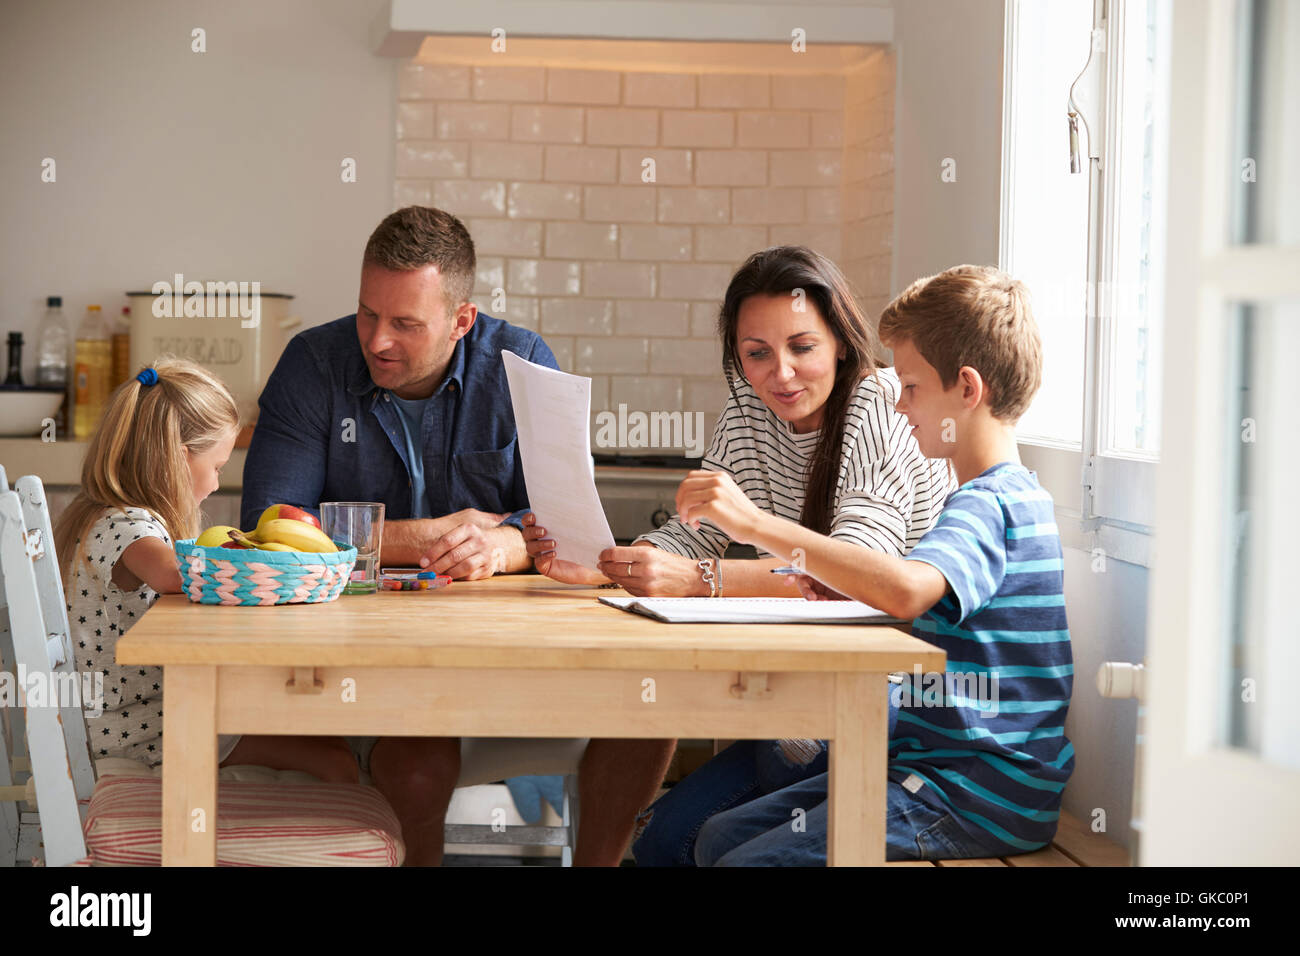 Parents Helping Children With Homework At Kitchen Table Stock Photo